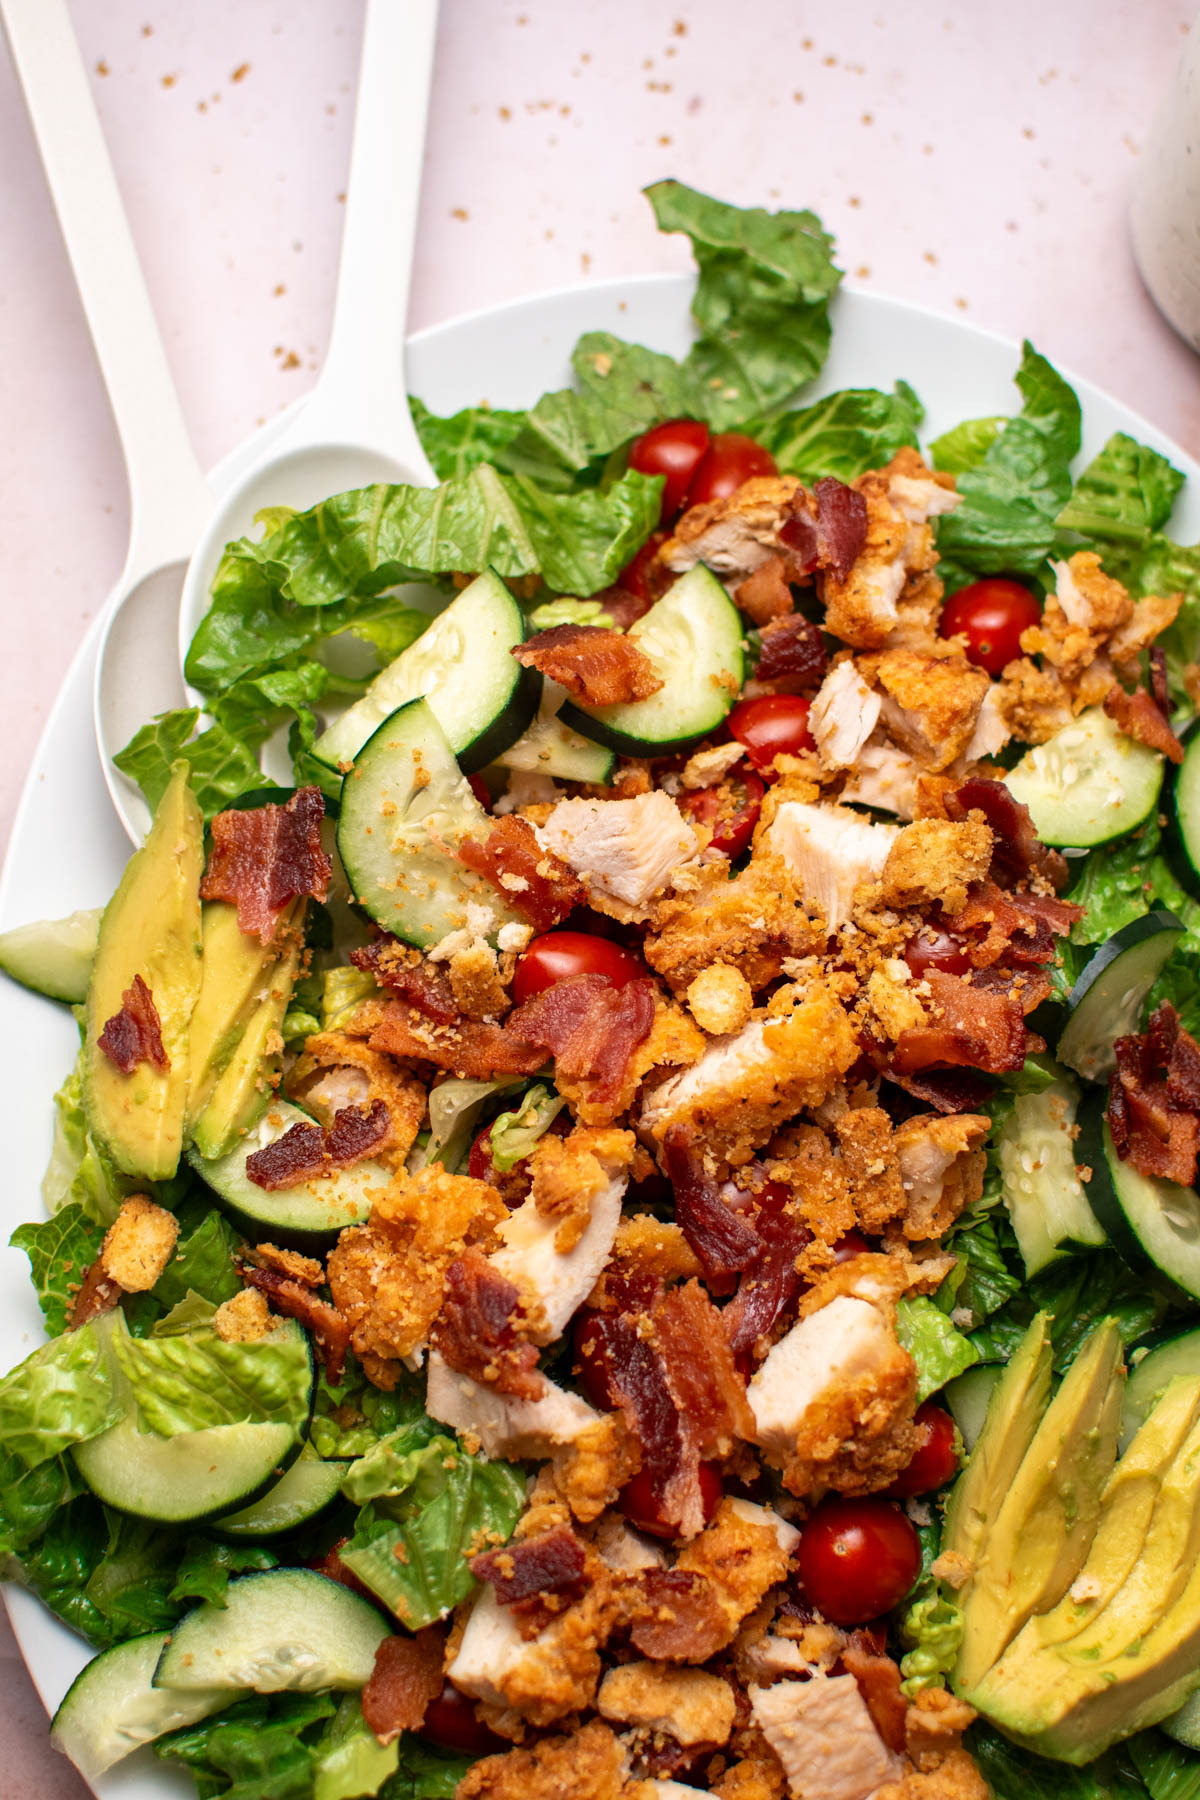 Two serving spoons in BLT salad with crispy chicken and avocado .